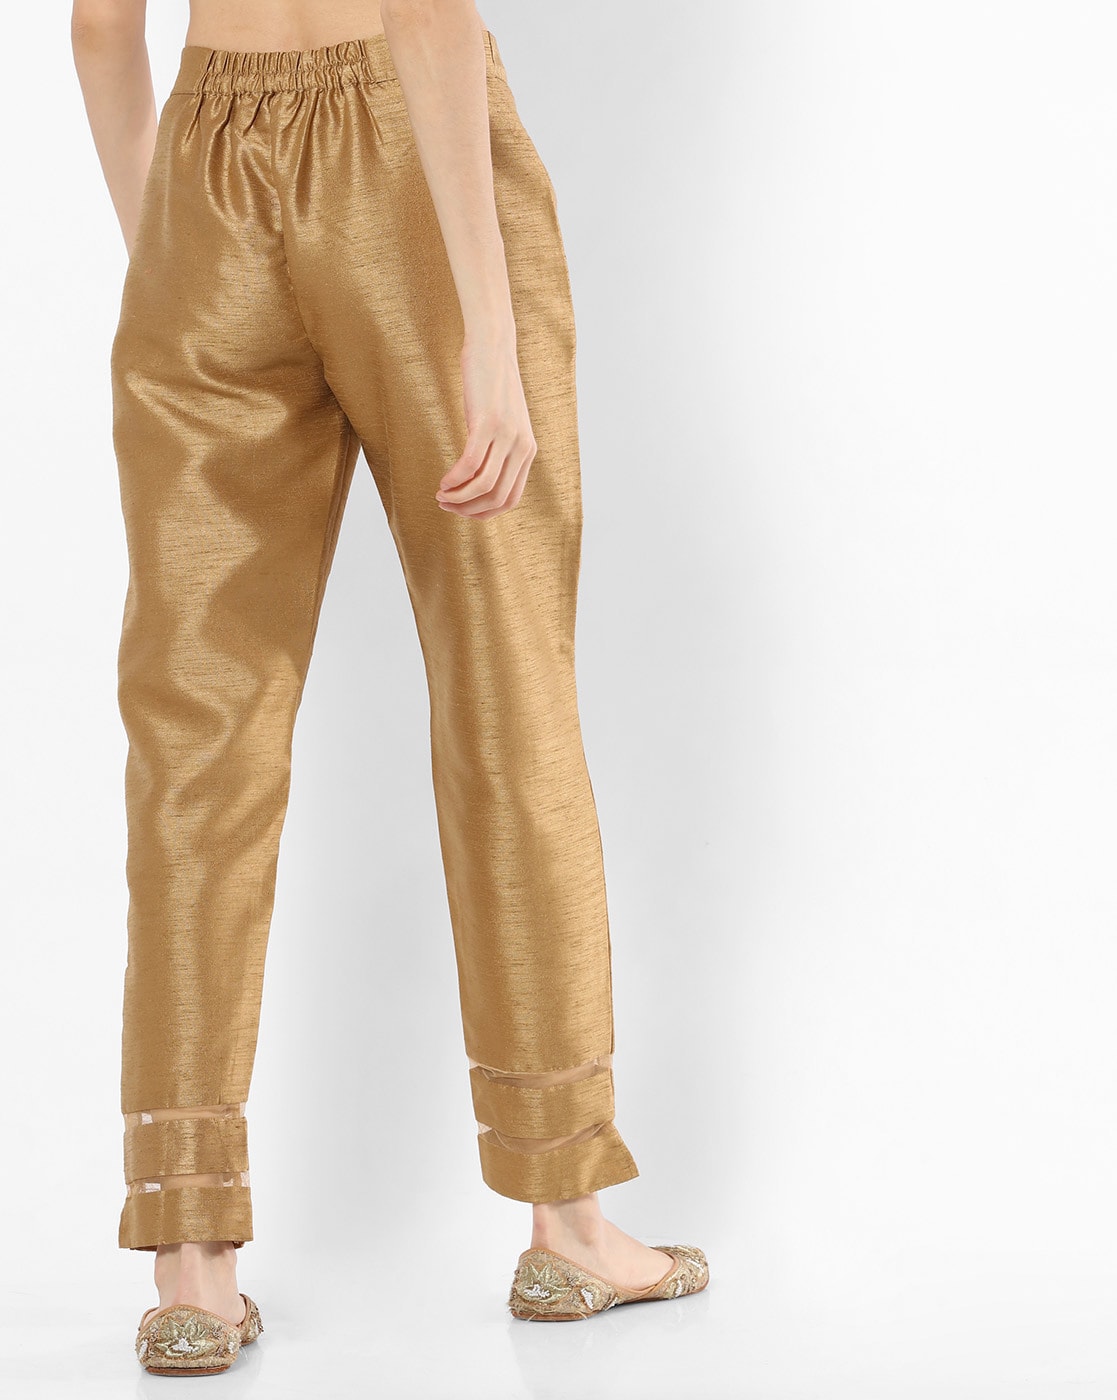 Top more than 78 gold satin pants latest - in.eteachers